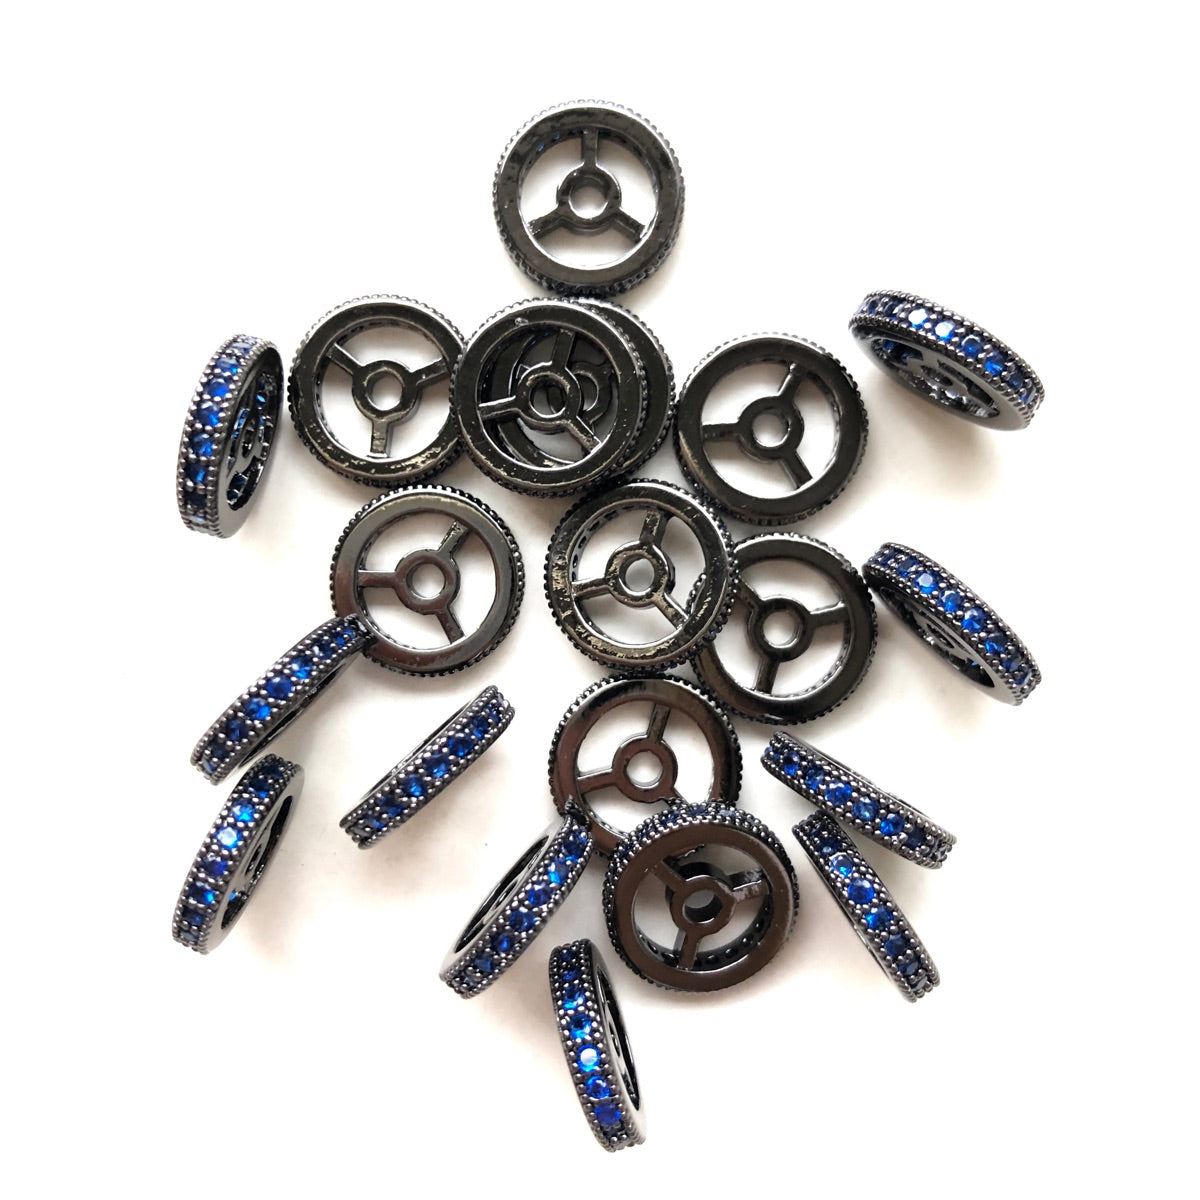 20pcs/lot 9.6/12mm Blue CZ Paved Wheel Rondelle Spacers Black CZ Paved Spacers New Spacers Arrivals Rondelle Beads Charms Beads Beyond